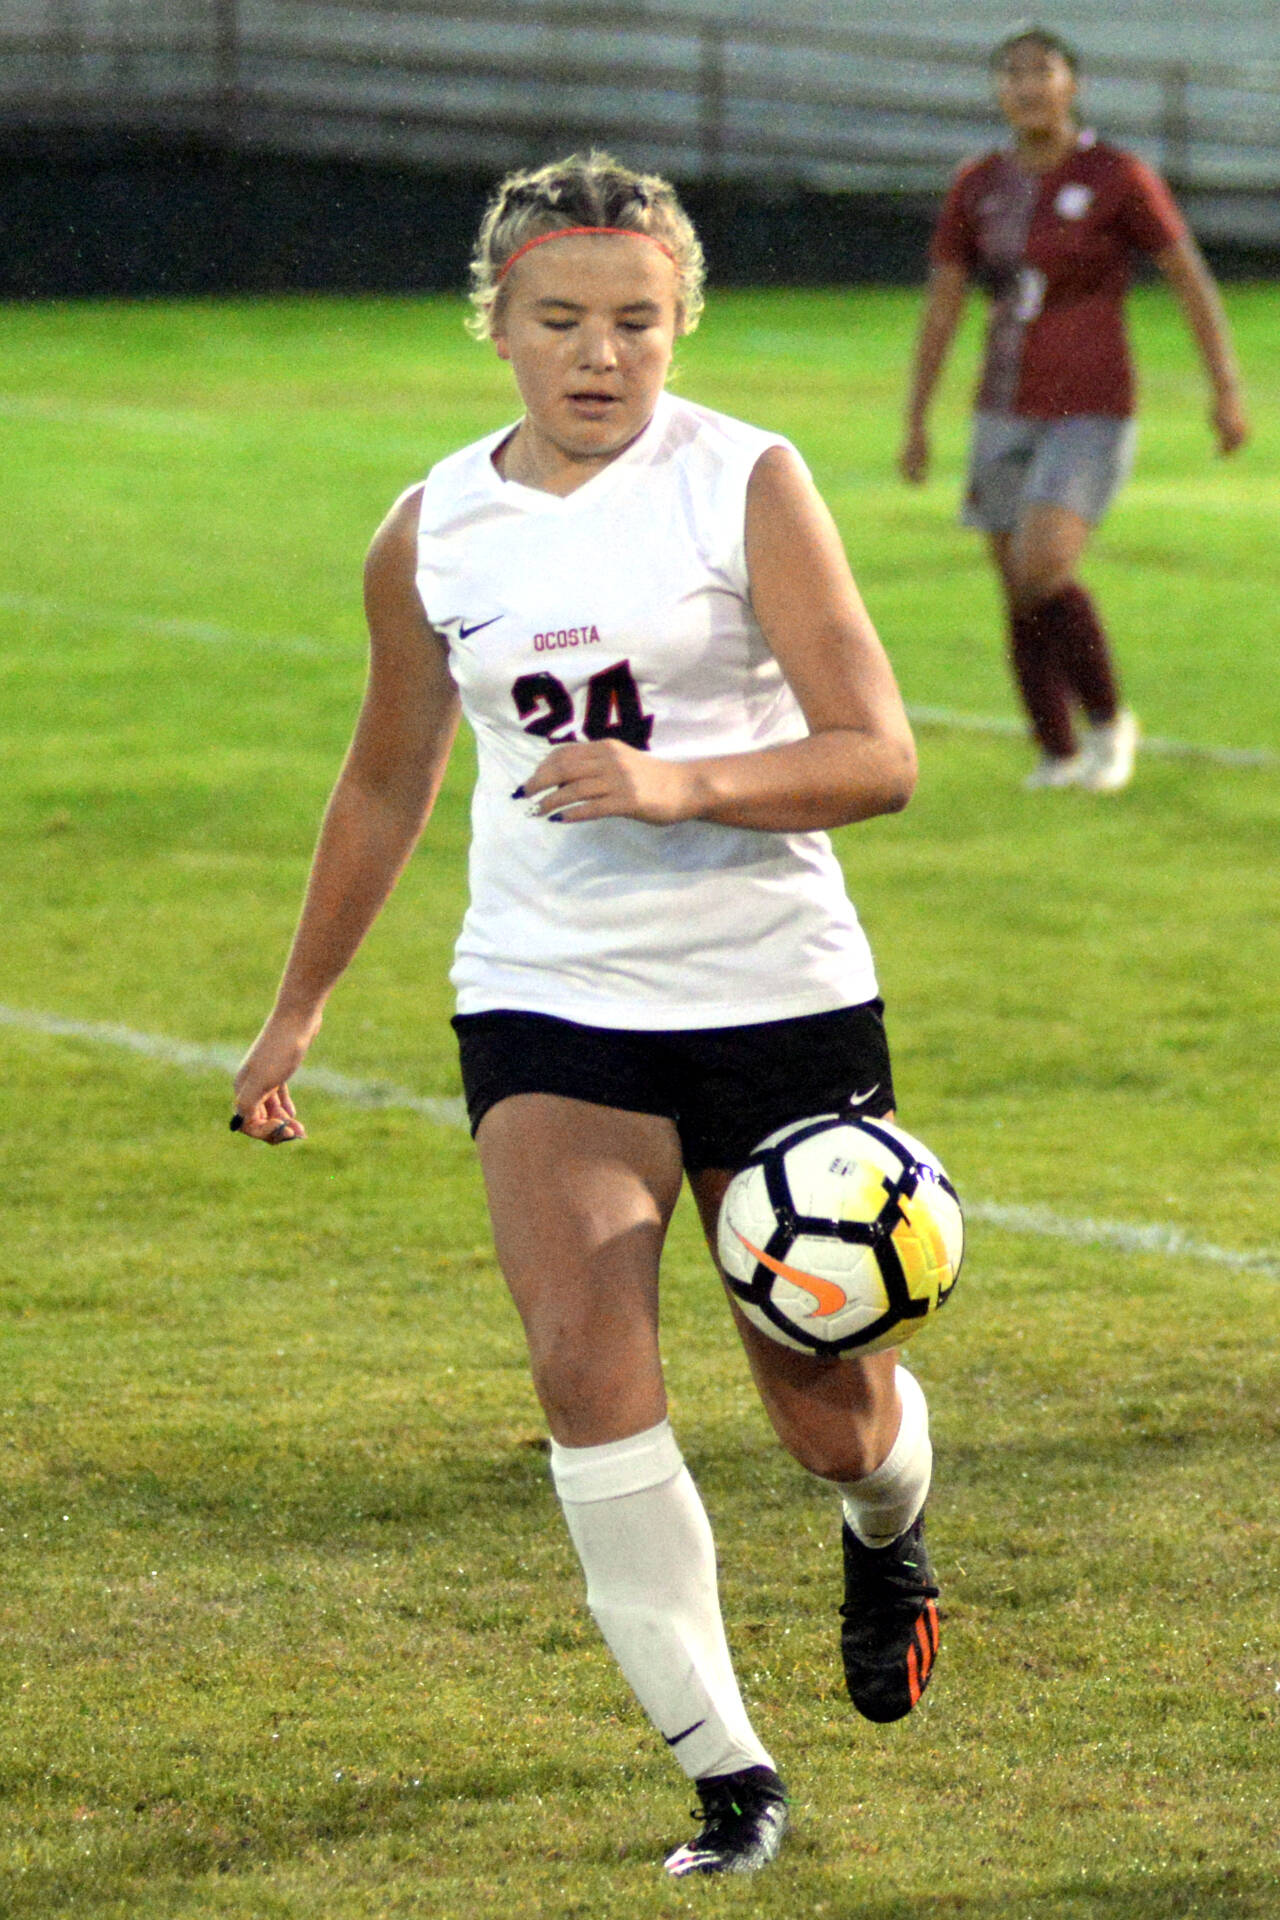 DAILY WORLD FILE PHOTO Ocosta eighth-grade forward Bristol Towle, seen here in a file photo from Sept. 28, was named to the 2B Central-Pacific League’s First Team after scoring 31 goals to break a school record for first-year varsity players this season.